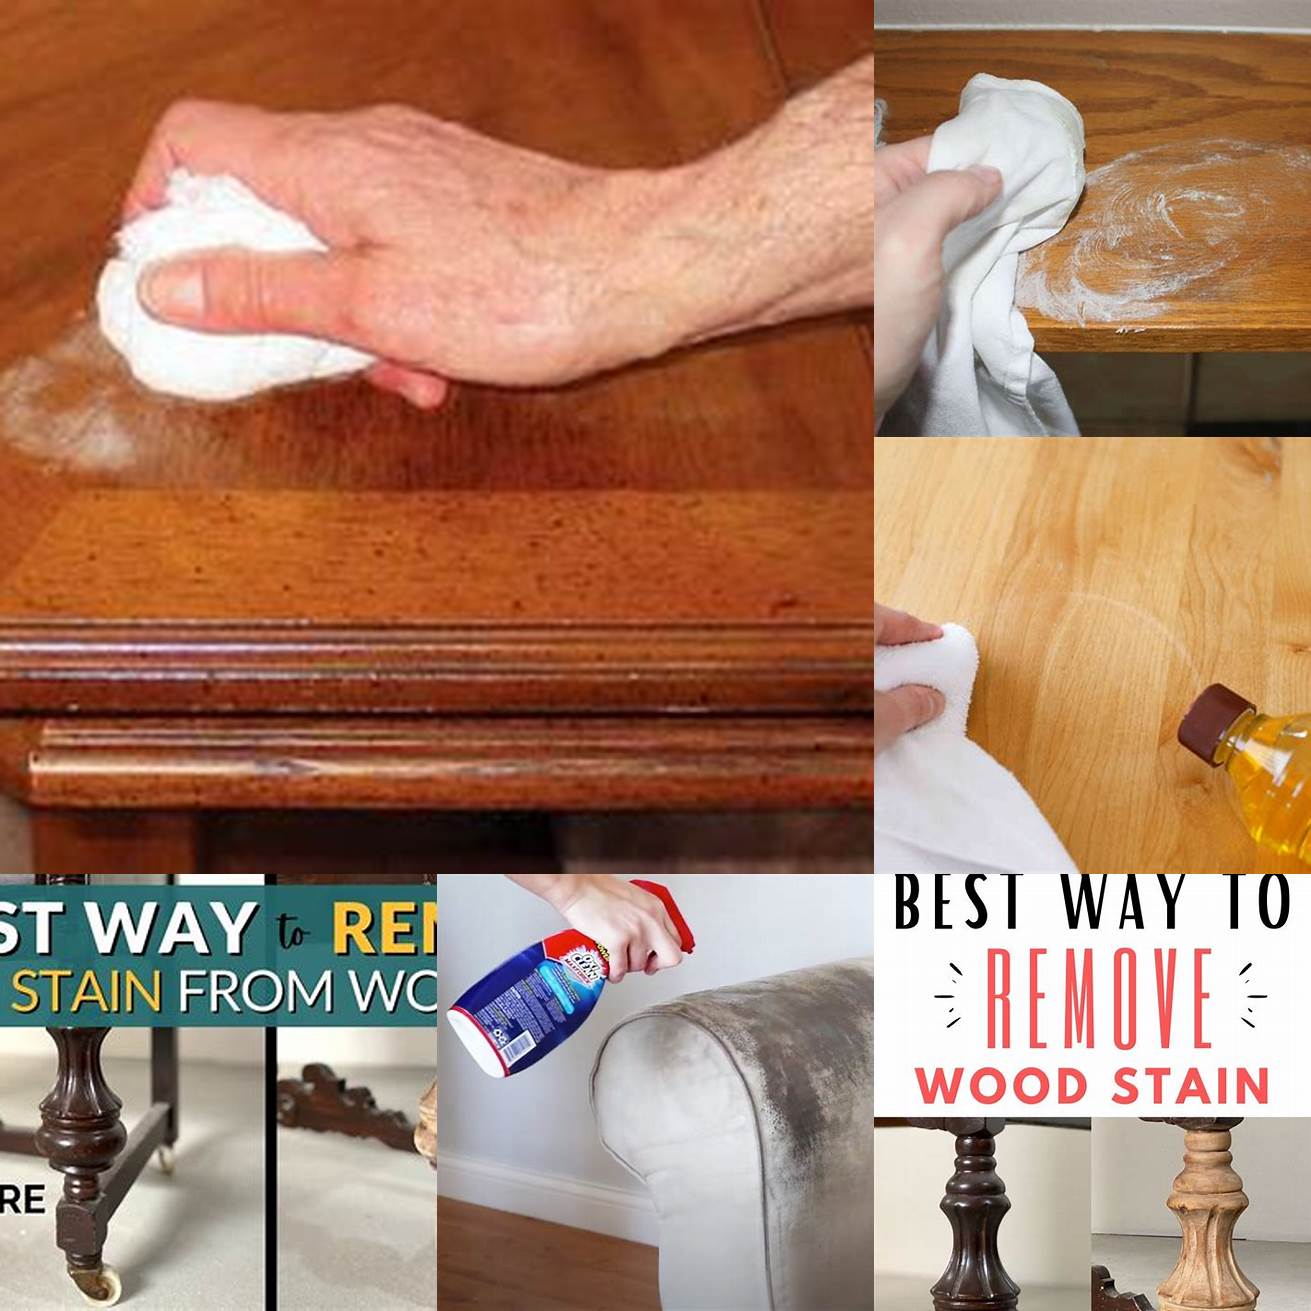 Removing Stains and Discoloration